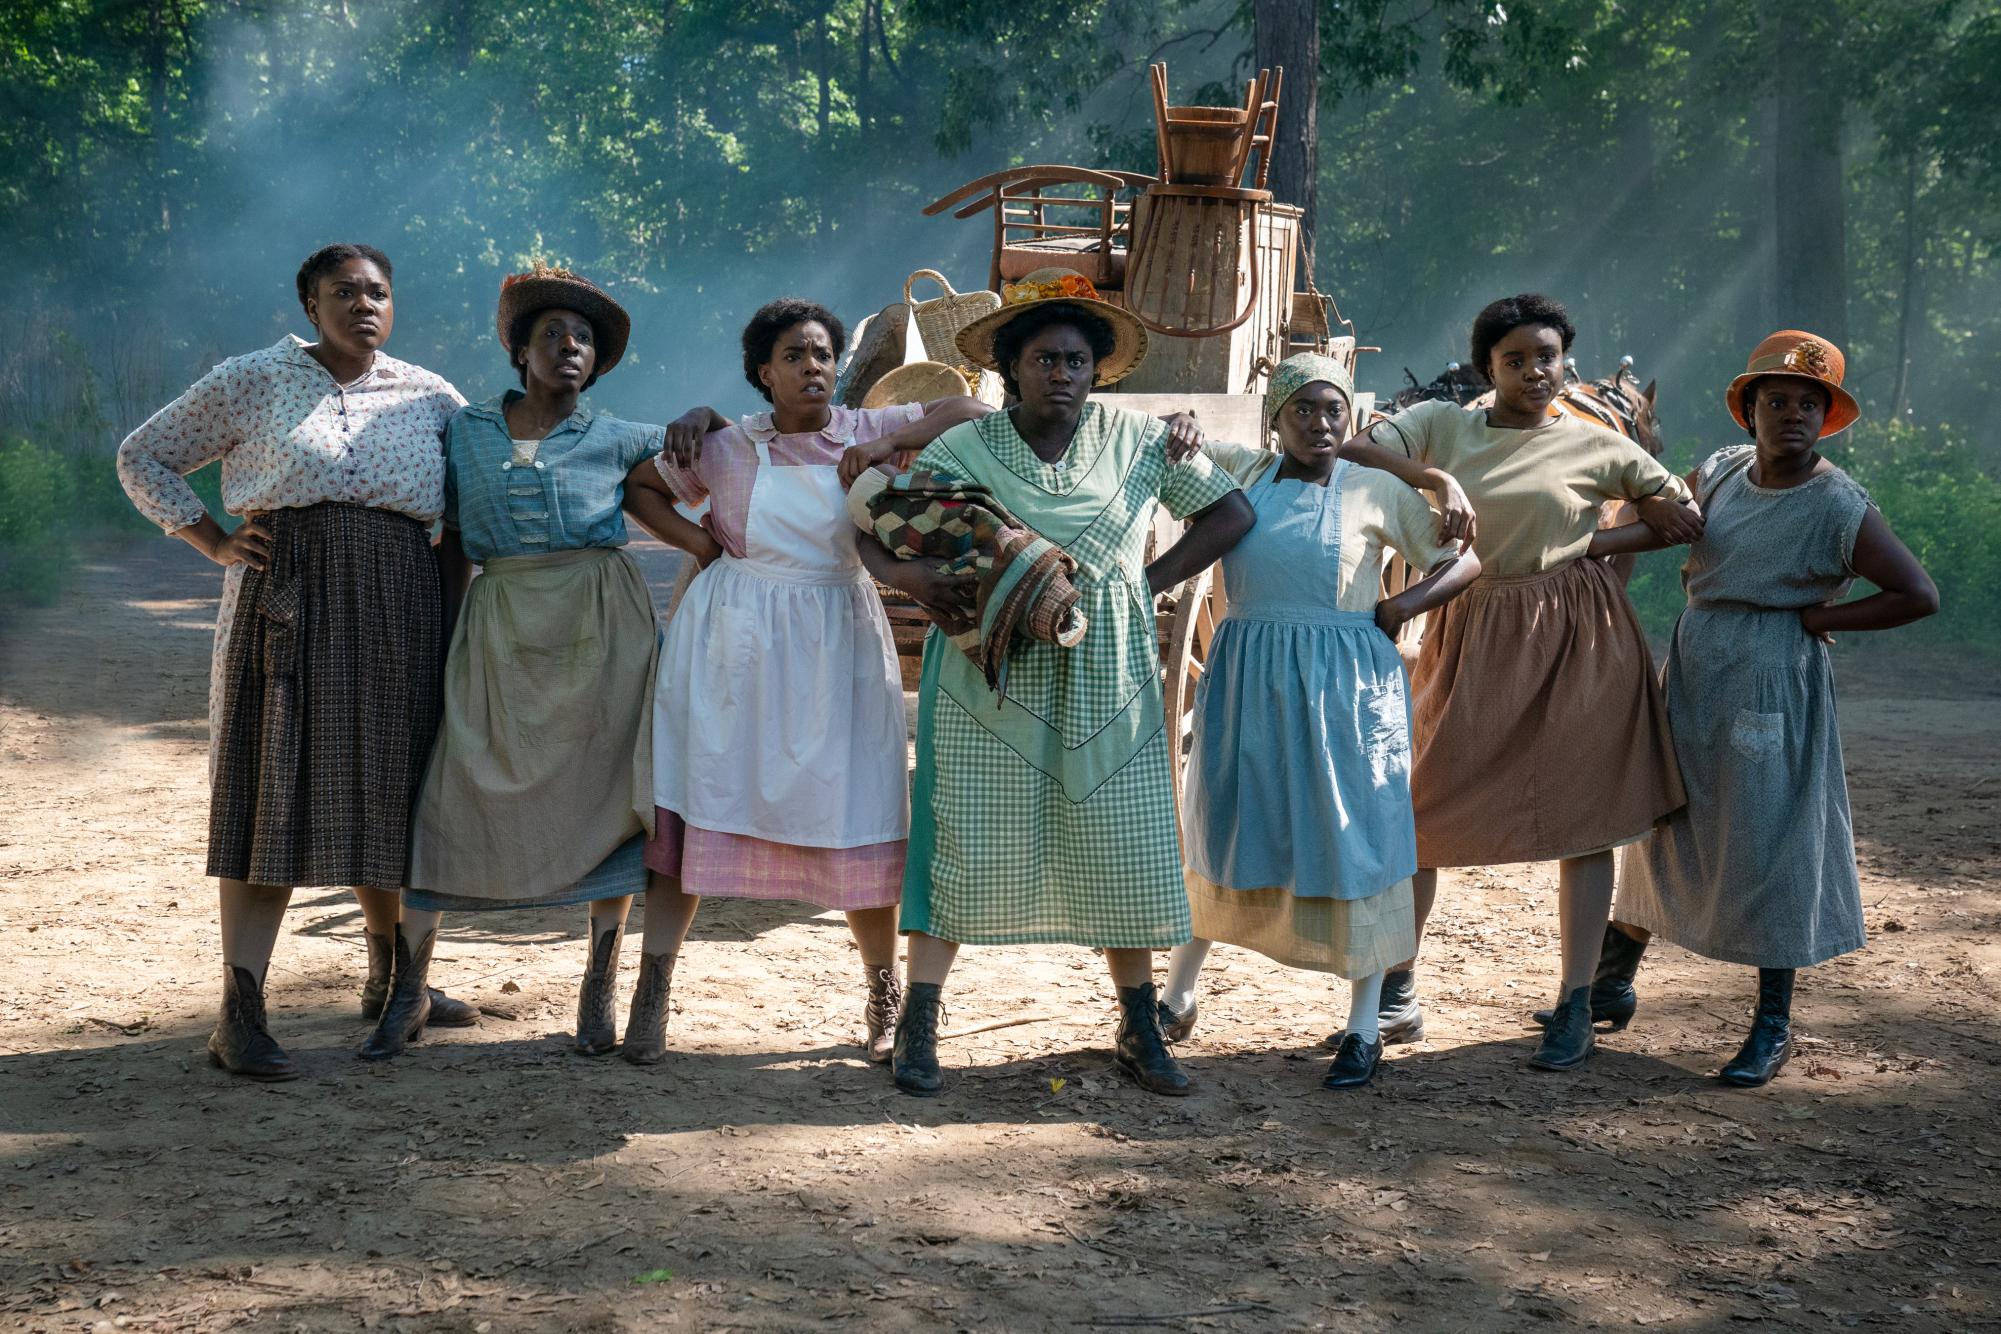 Bazawule and cast discuss film ‘The Color Purple’ in Warner Bros. roundtable Blitz